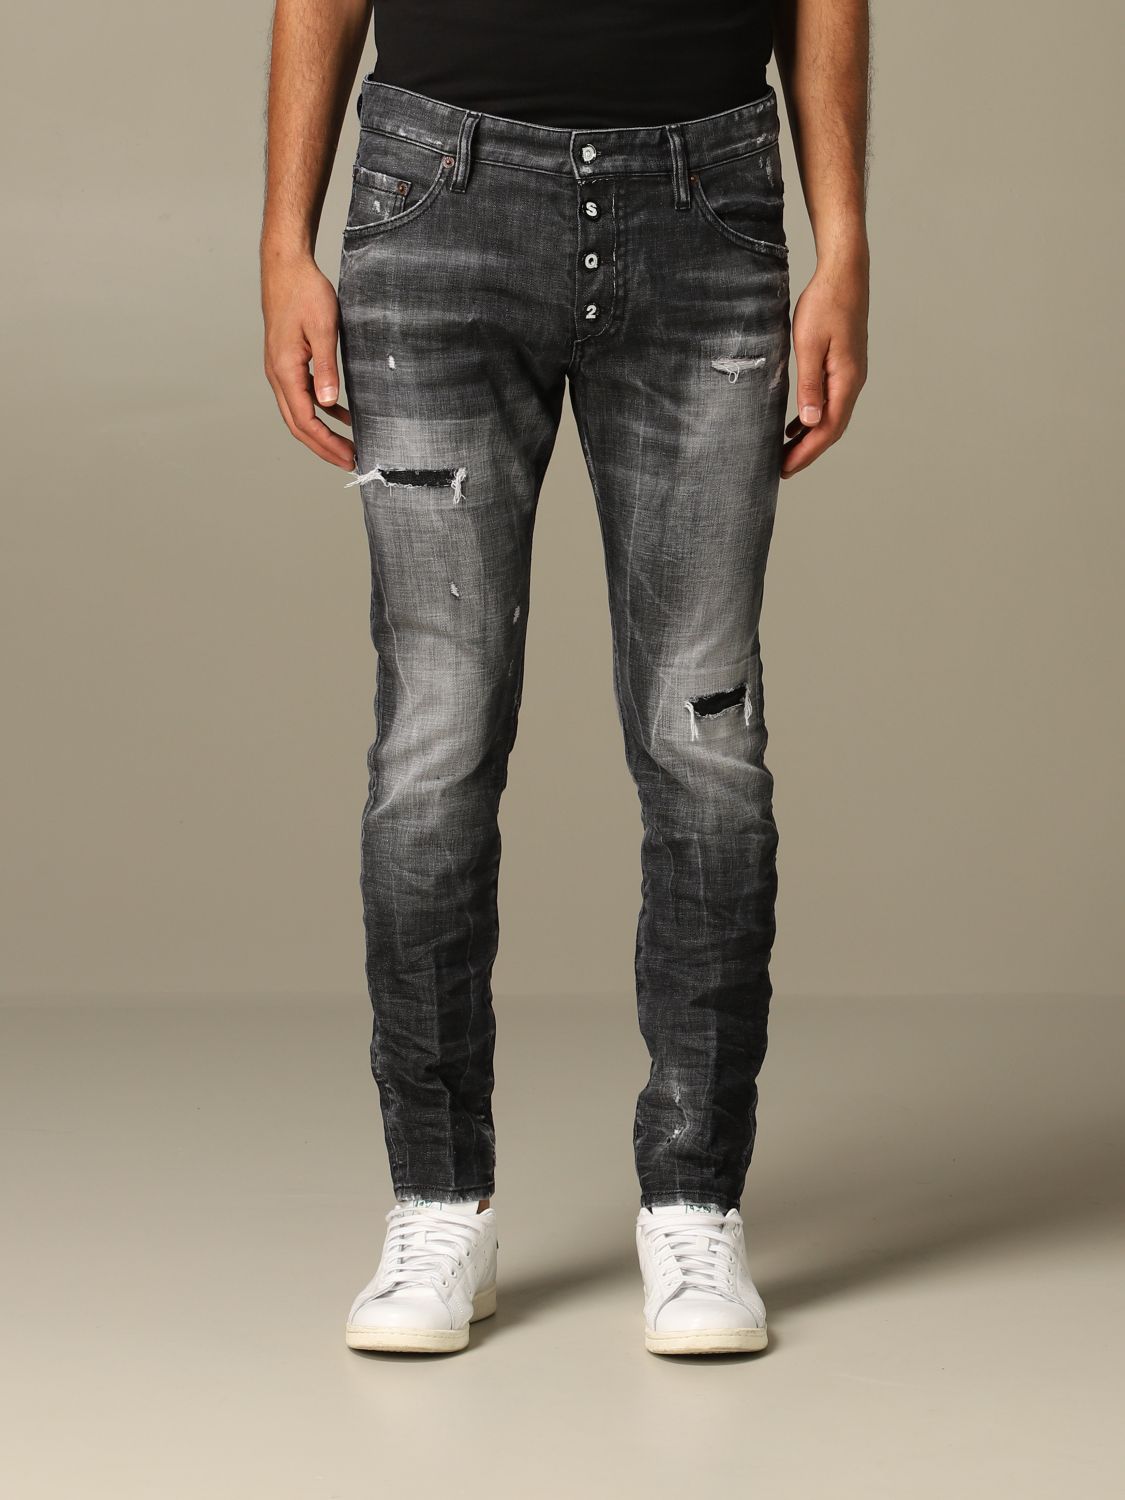 Dsquared2 Outlet: slim fit jeans with breaks - Black | Dsquared2 S74LB0783 S30357 online on